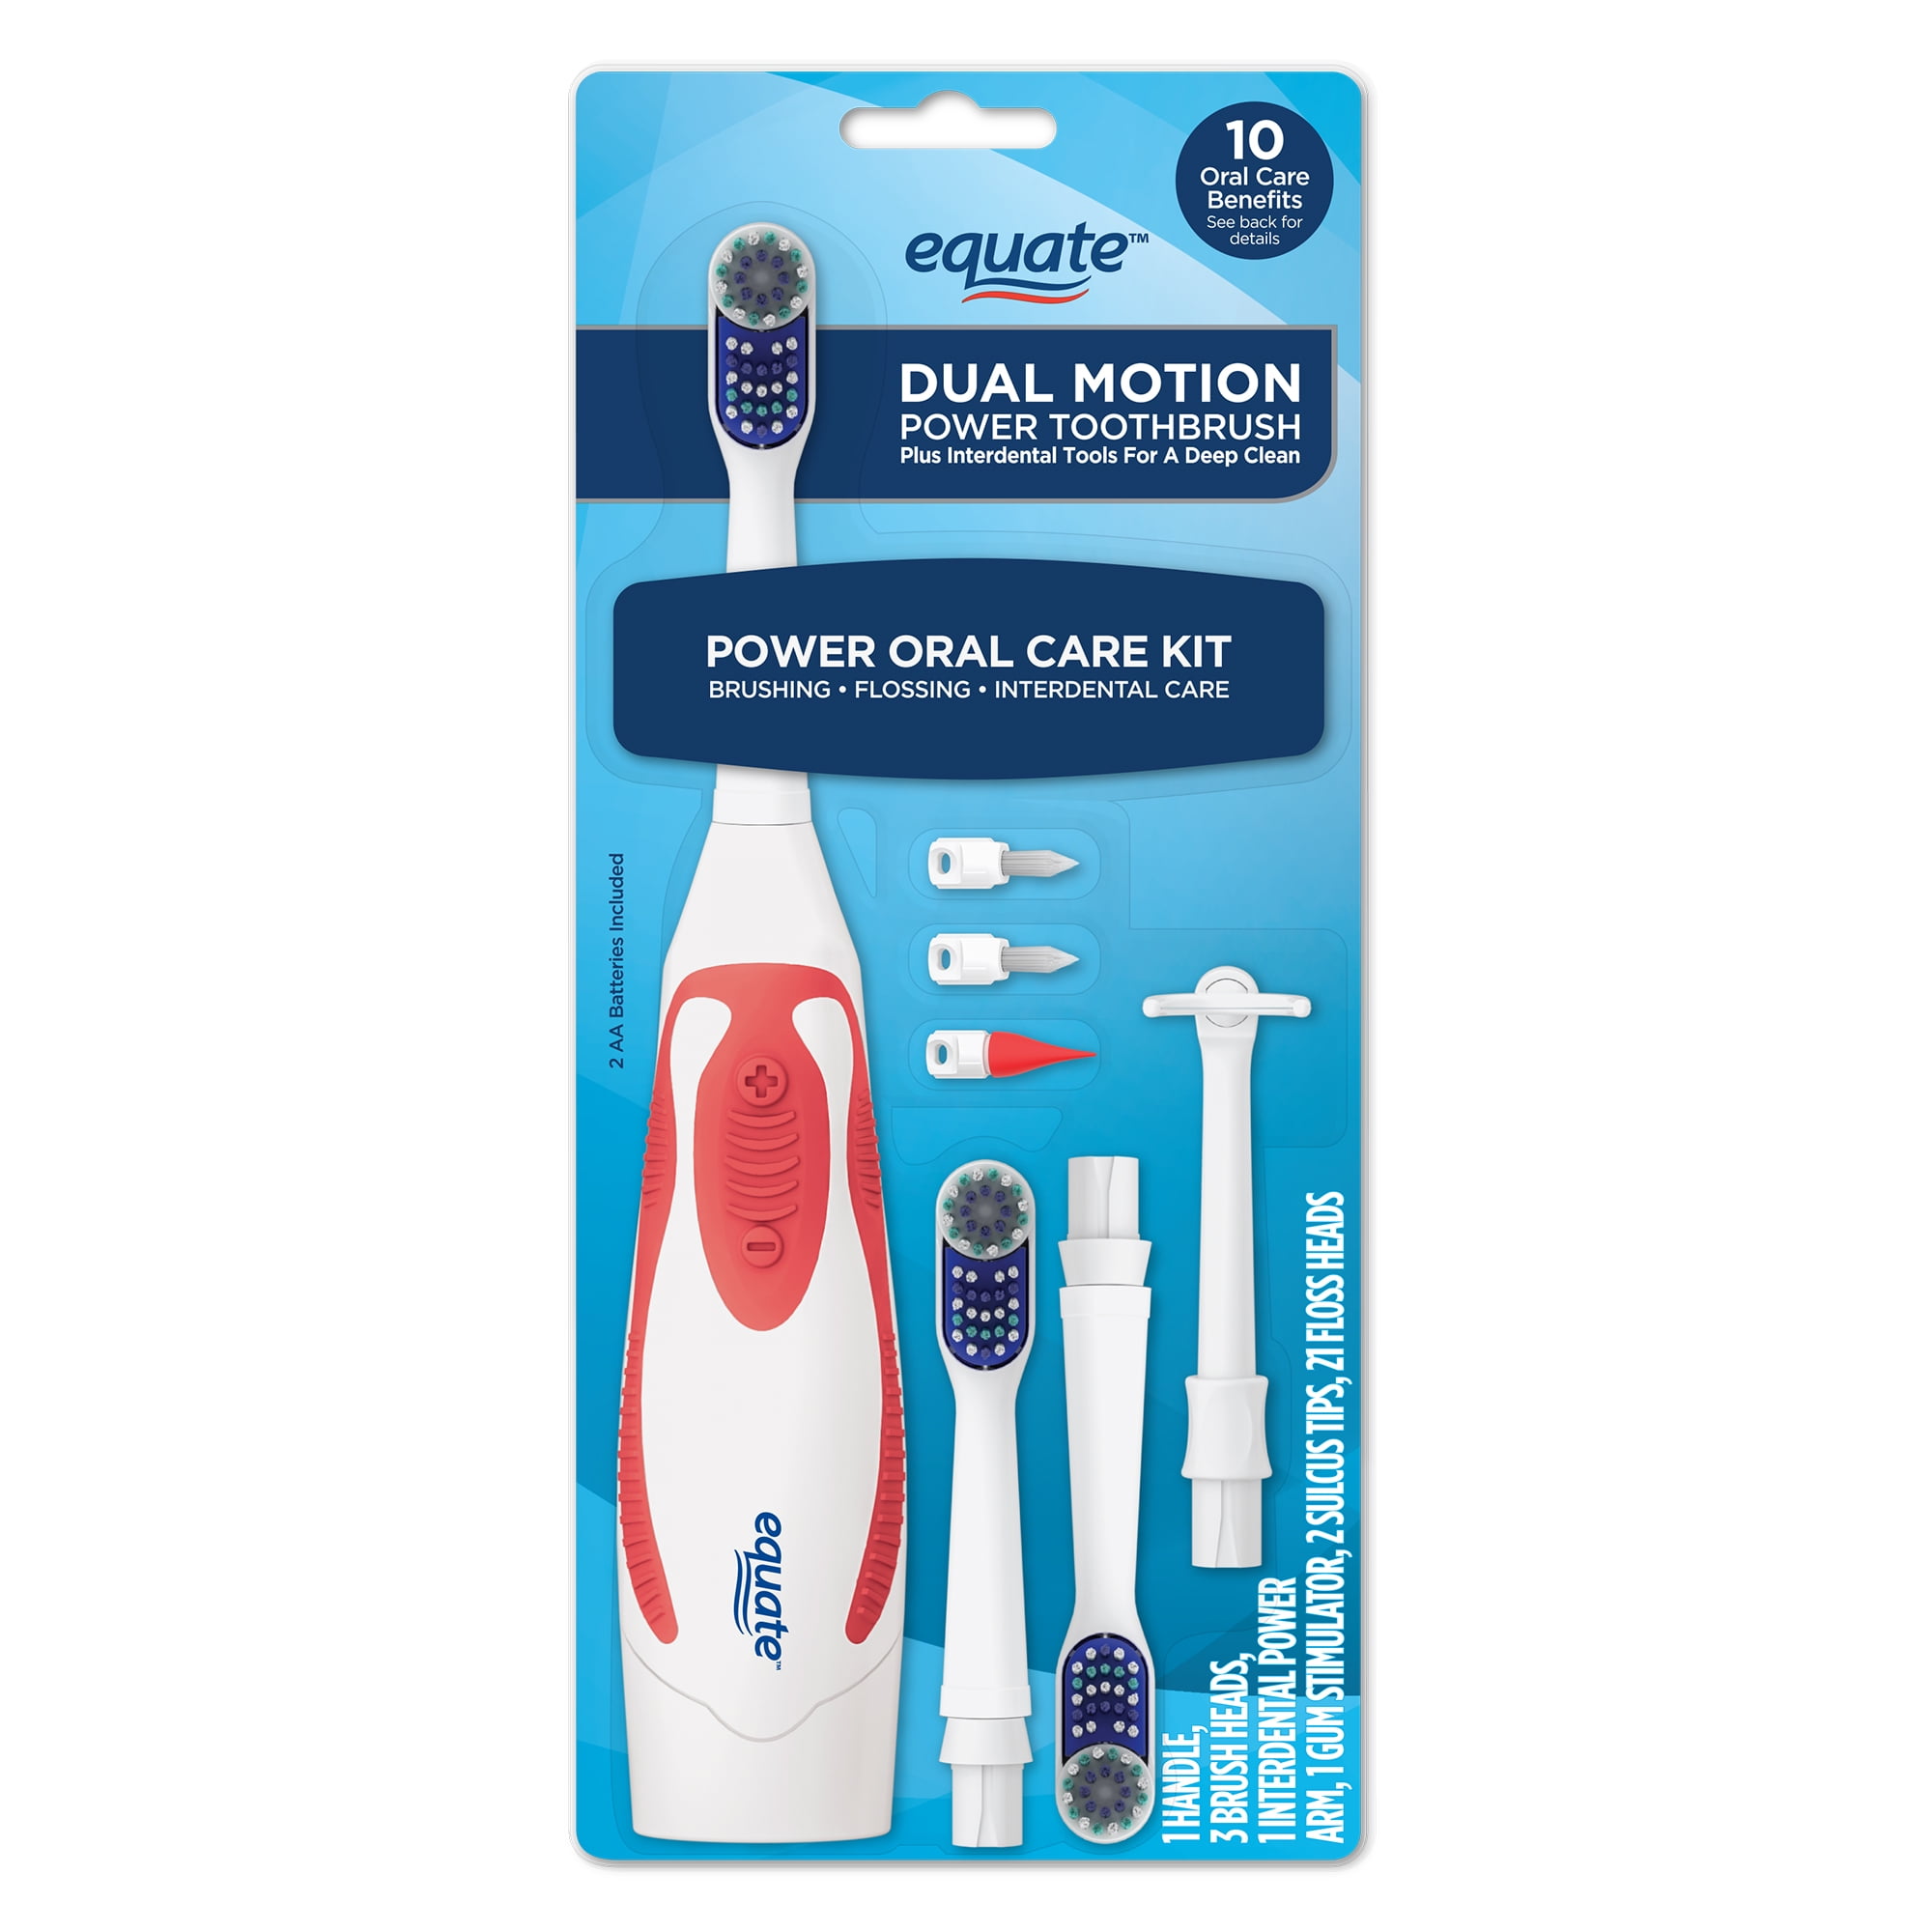 Equate Dual Motion Power Oral Care Kit with Interdental Tools, Soft Bristles